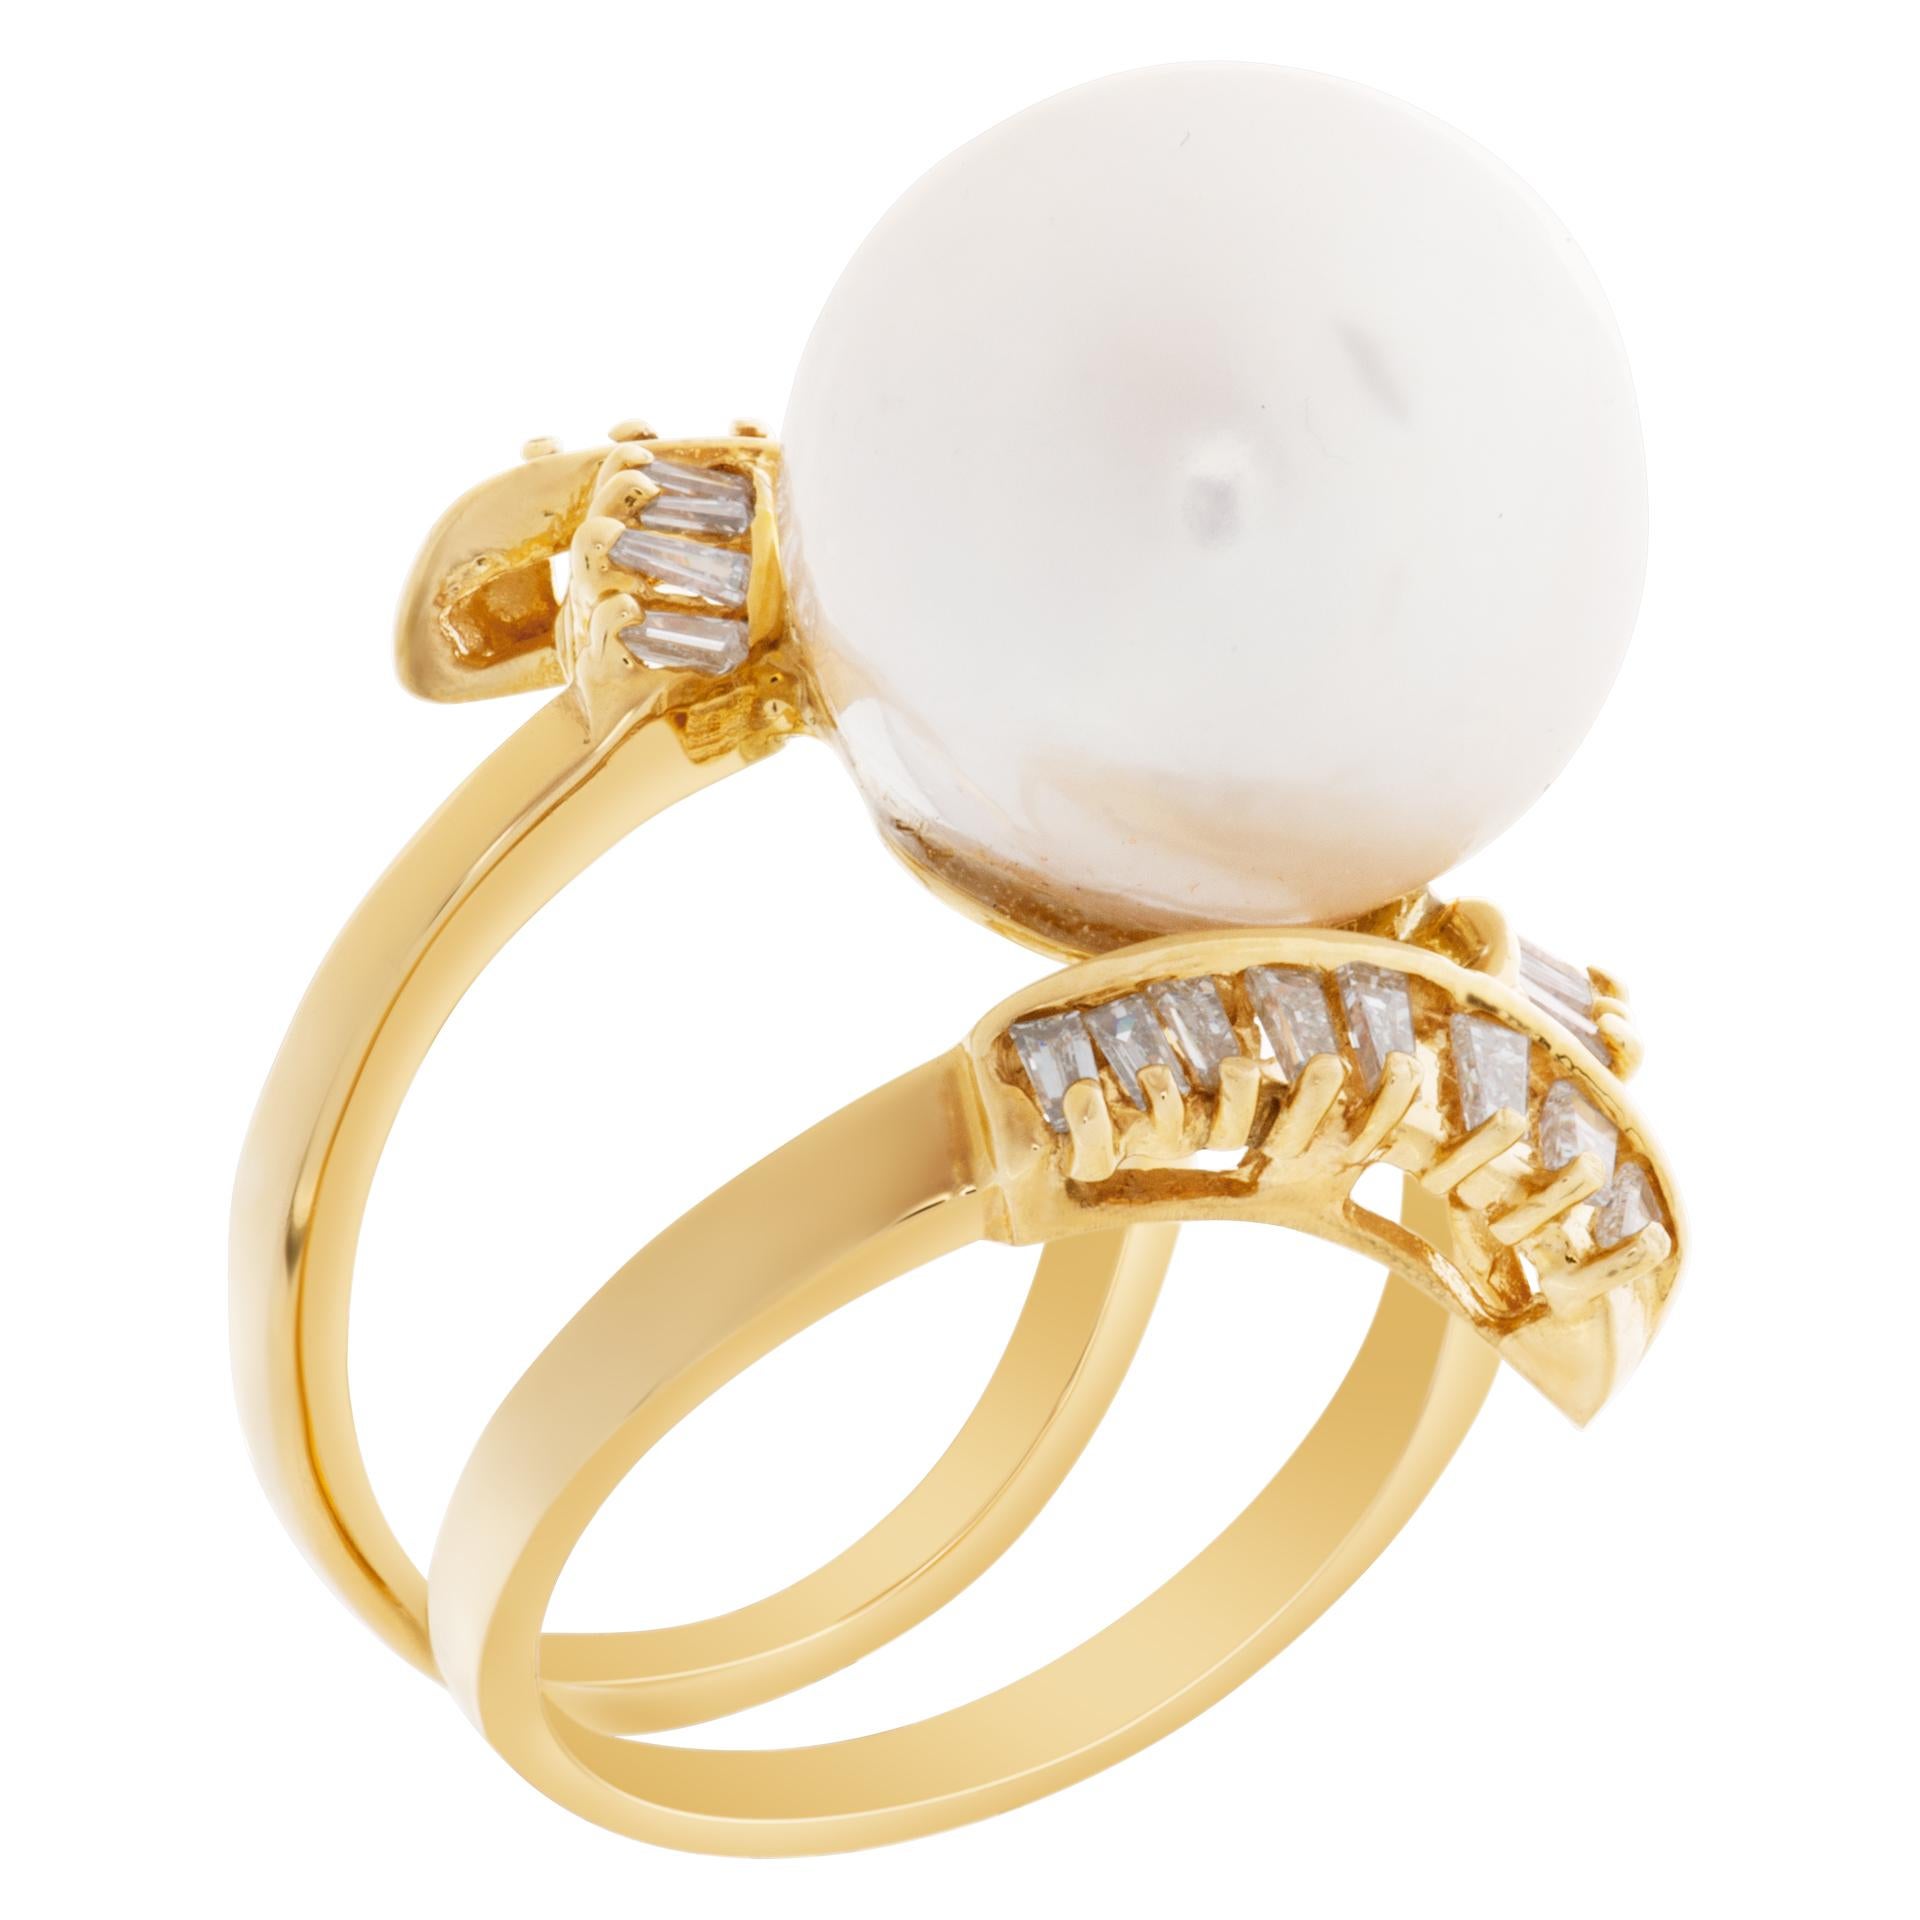 South Sea Pearl Ring in 18k Yellow Gold In Excellent Condition For Sale In Surfside, FL